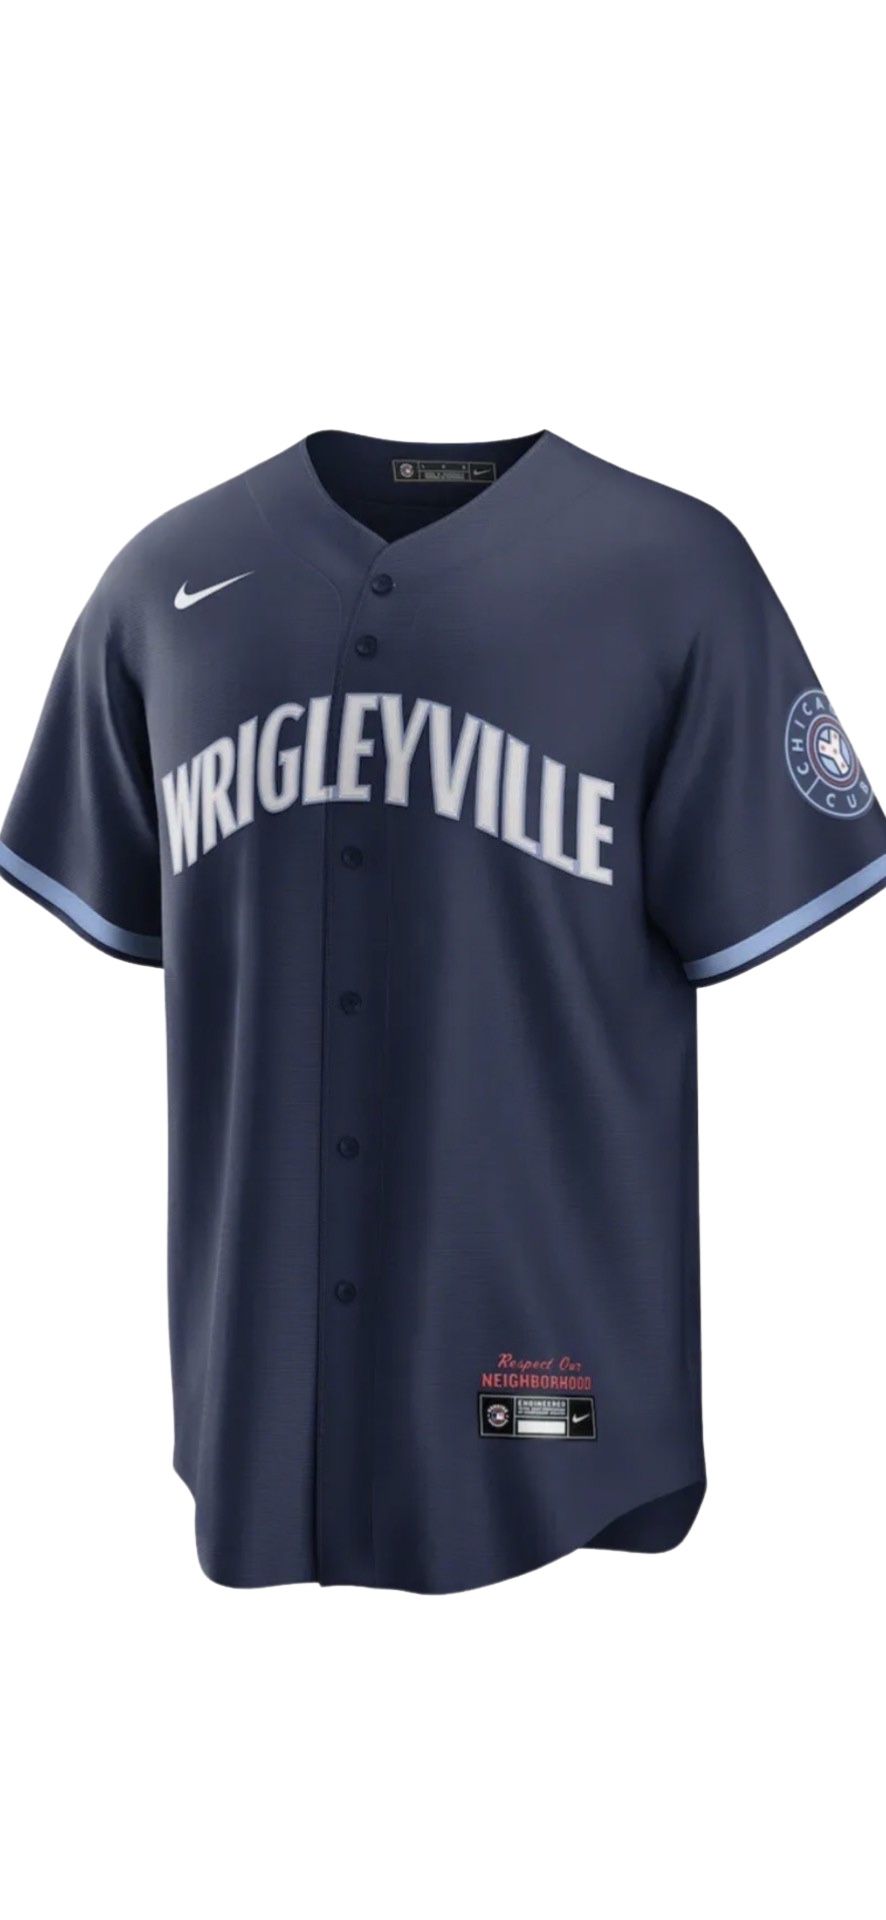 Nike Chicago Cubs City Connect Wrigleyville Jersey - Men’s L